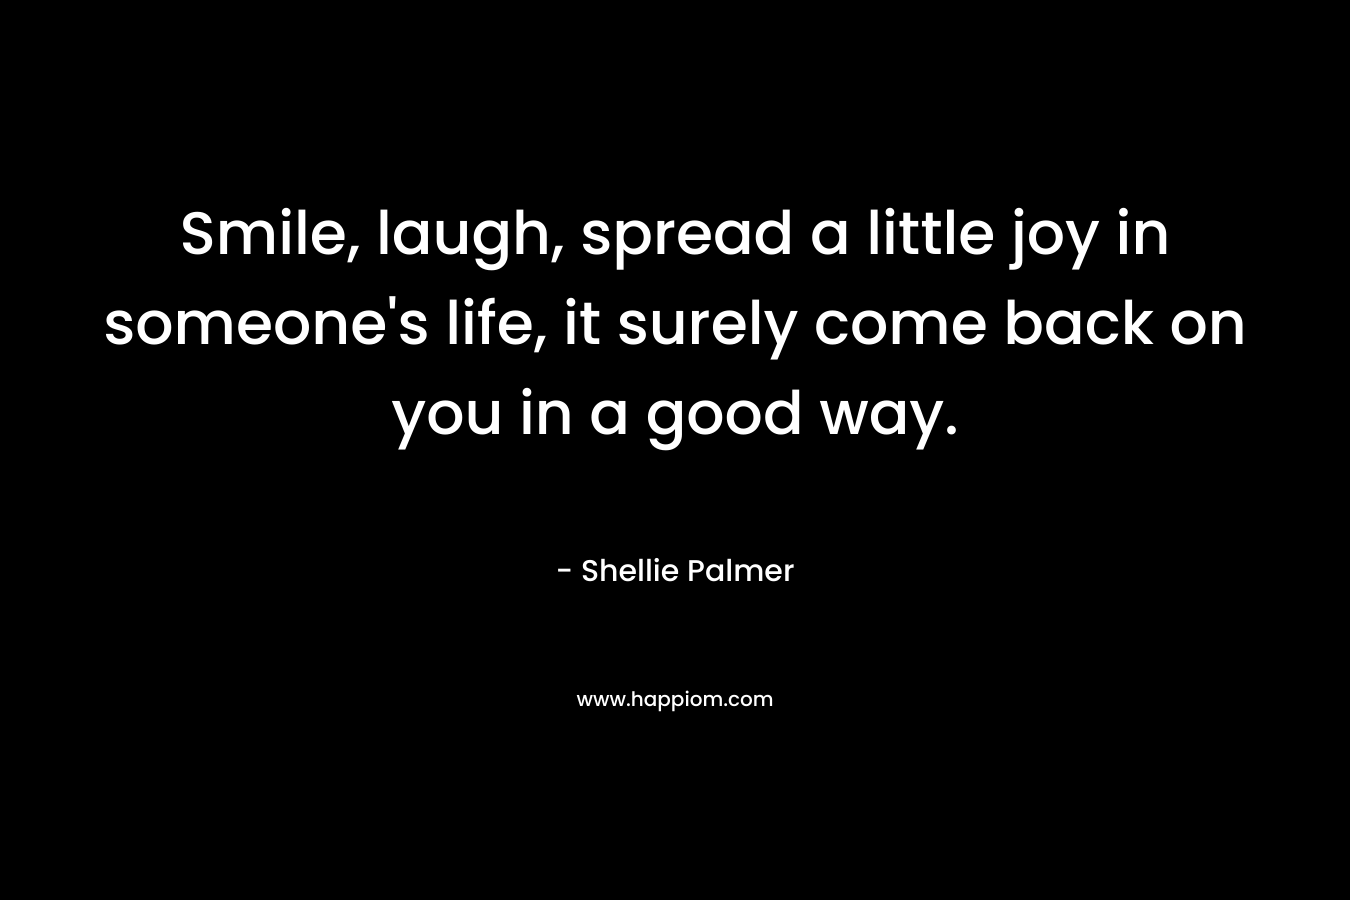 Smile, laugh, spread a little joy in someone’s life, it surely come back on you in a good way. – Shellie Palmer